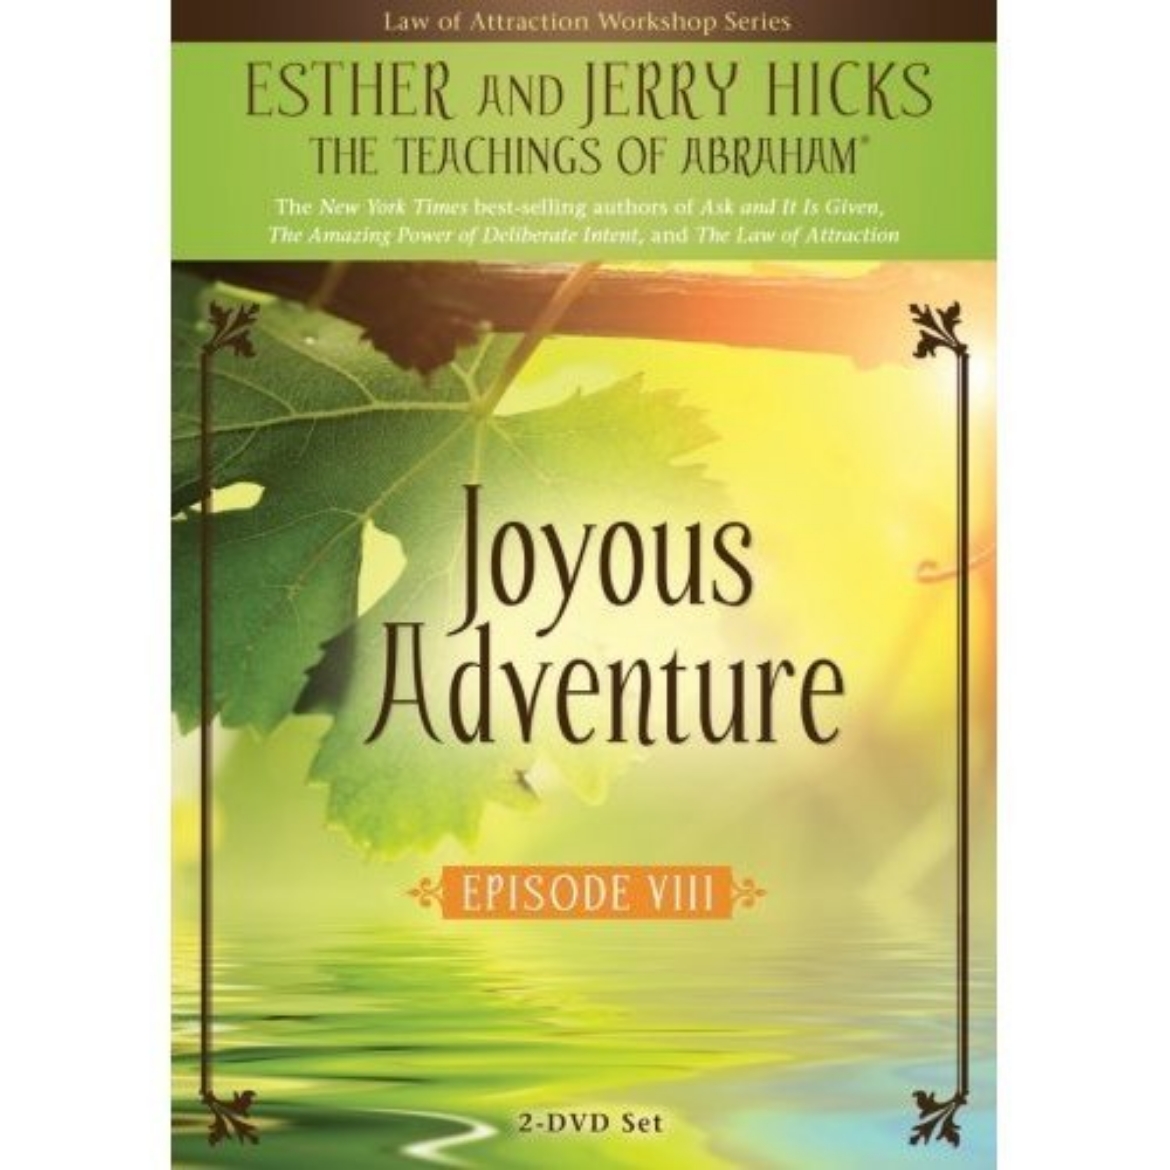 Picture of Episode VIII : Joyous Adventure - The Law of Attraction in Action